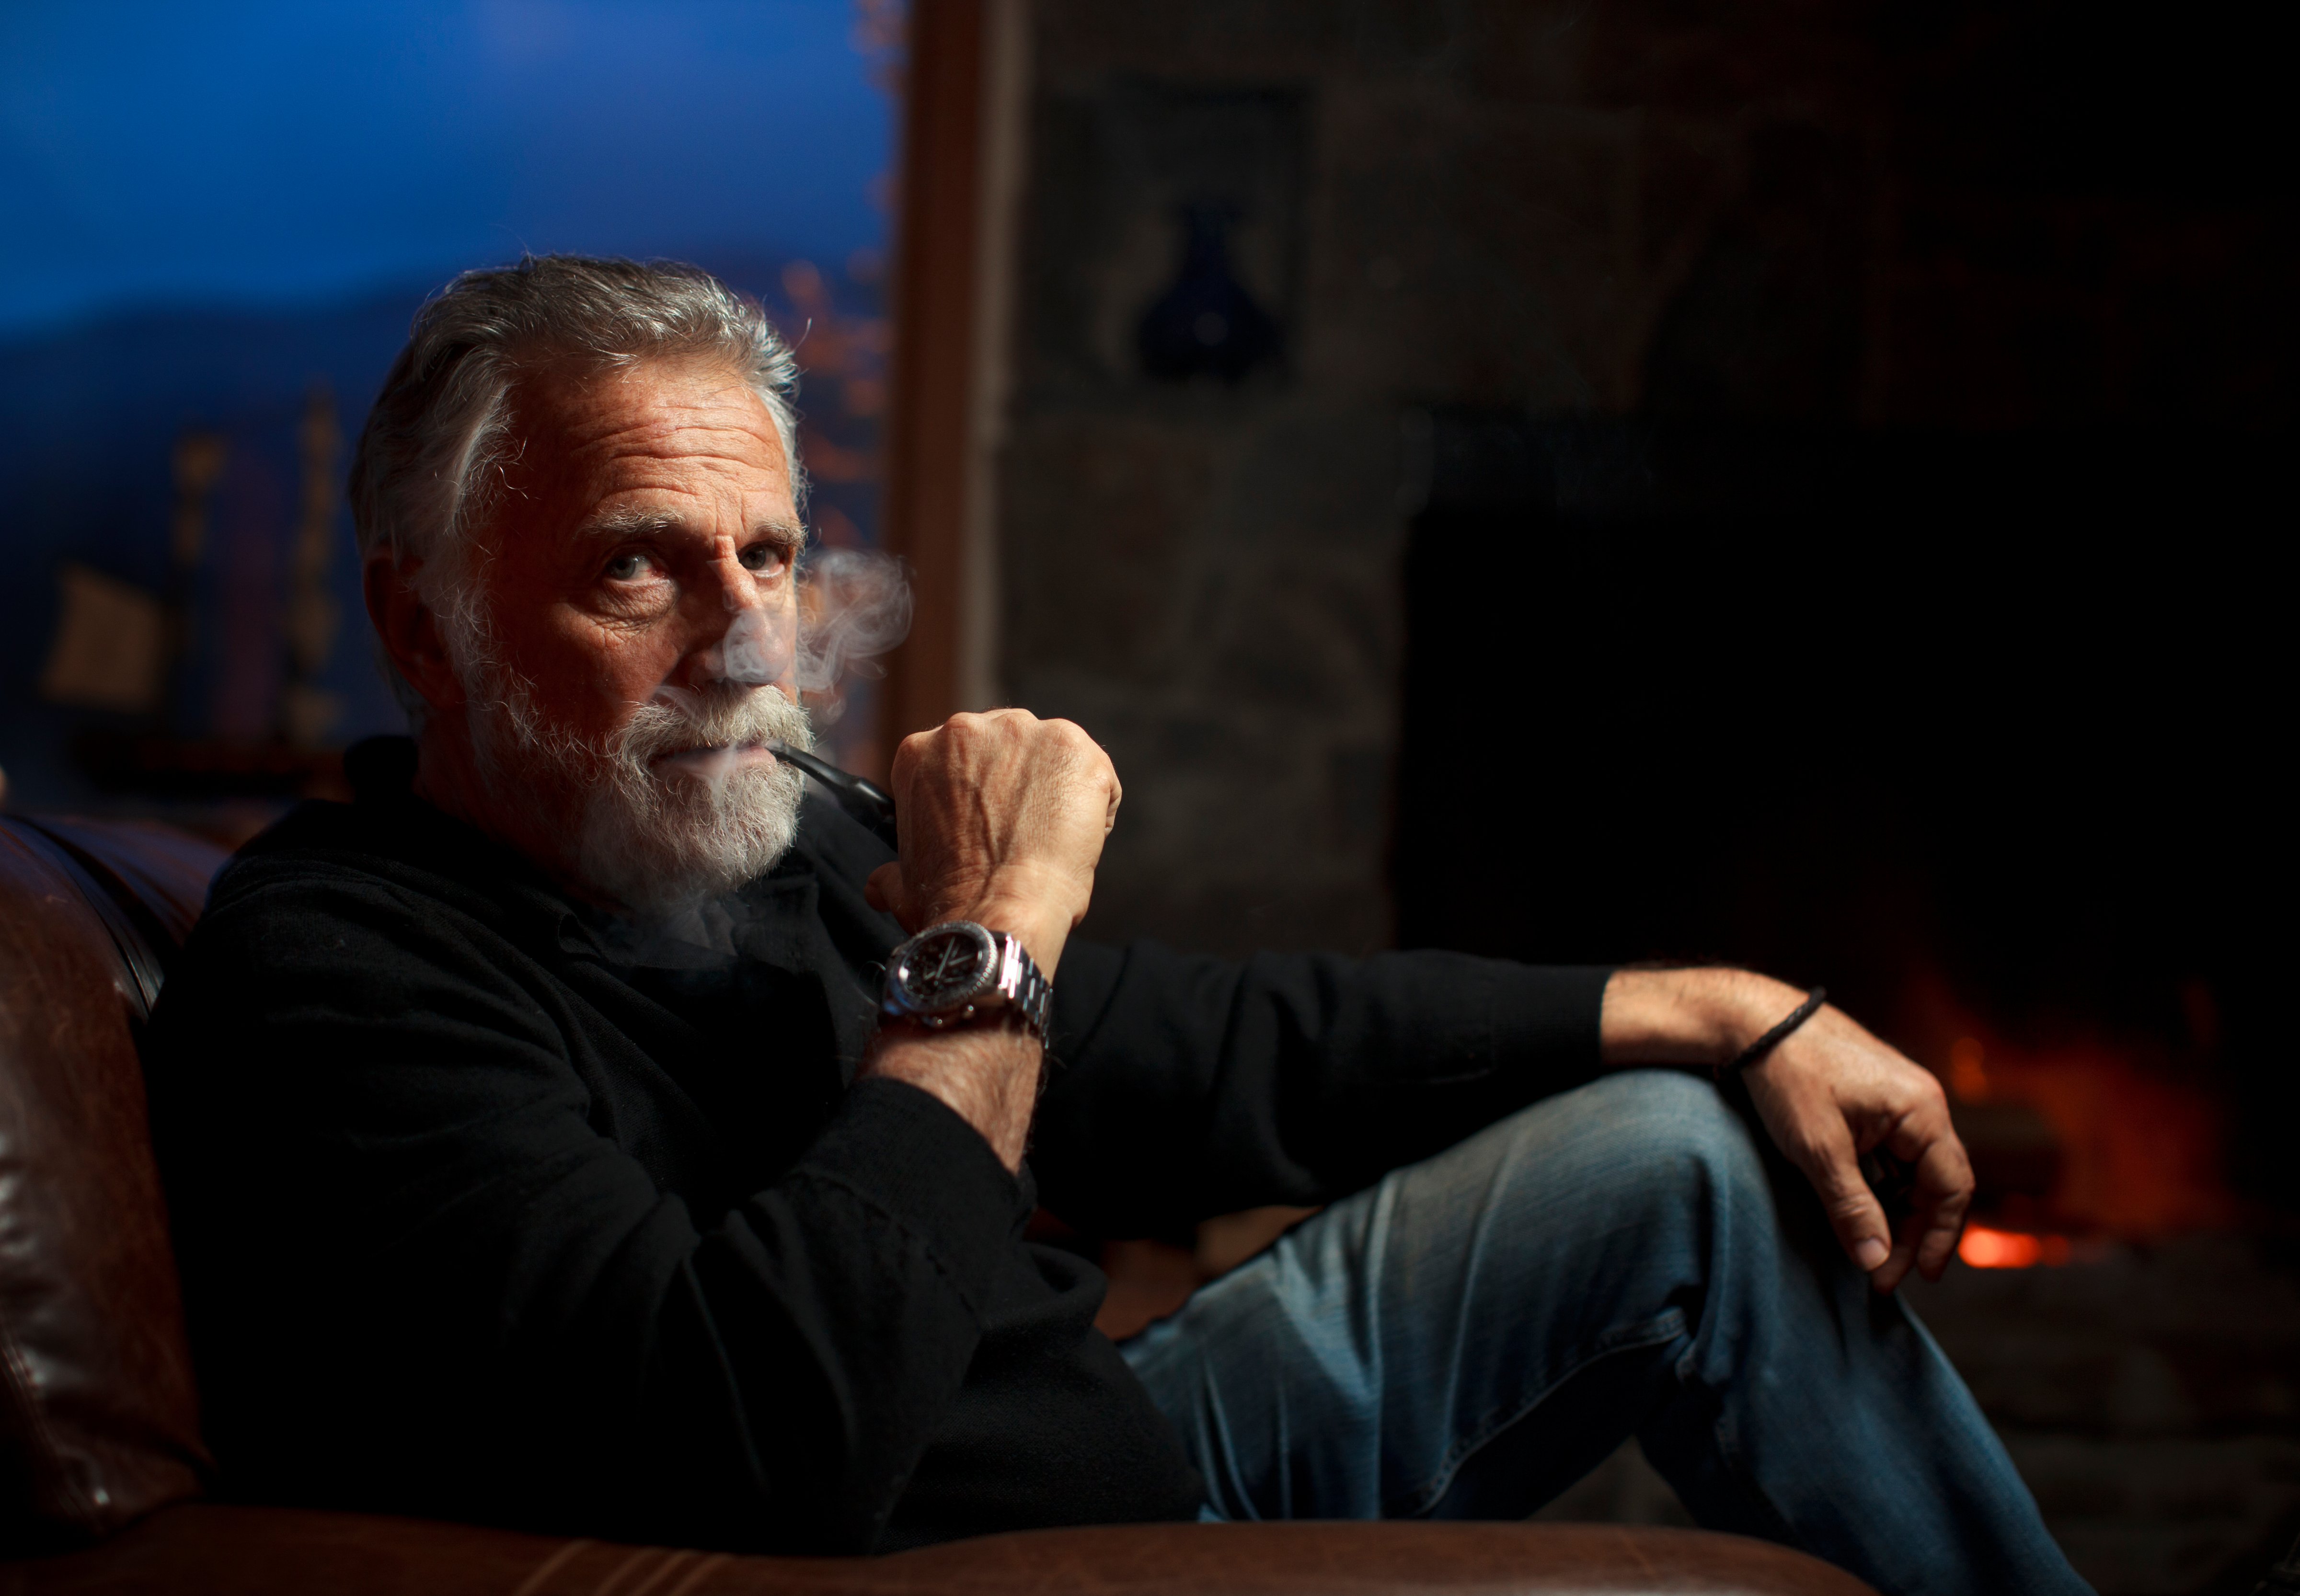 Most Interesting Man Takes Land Mine Role